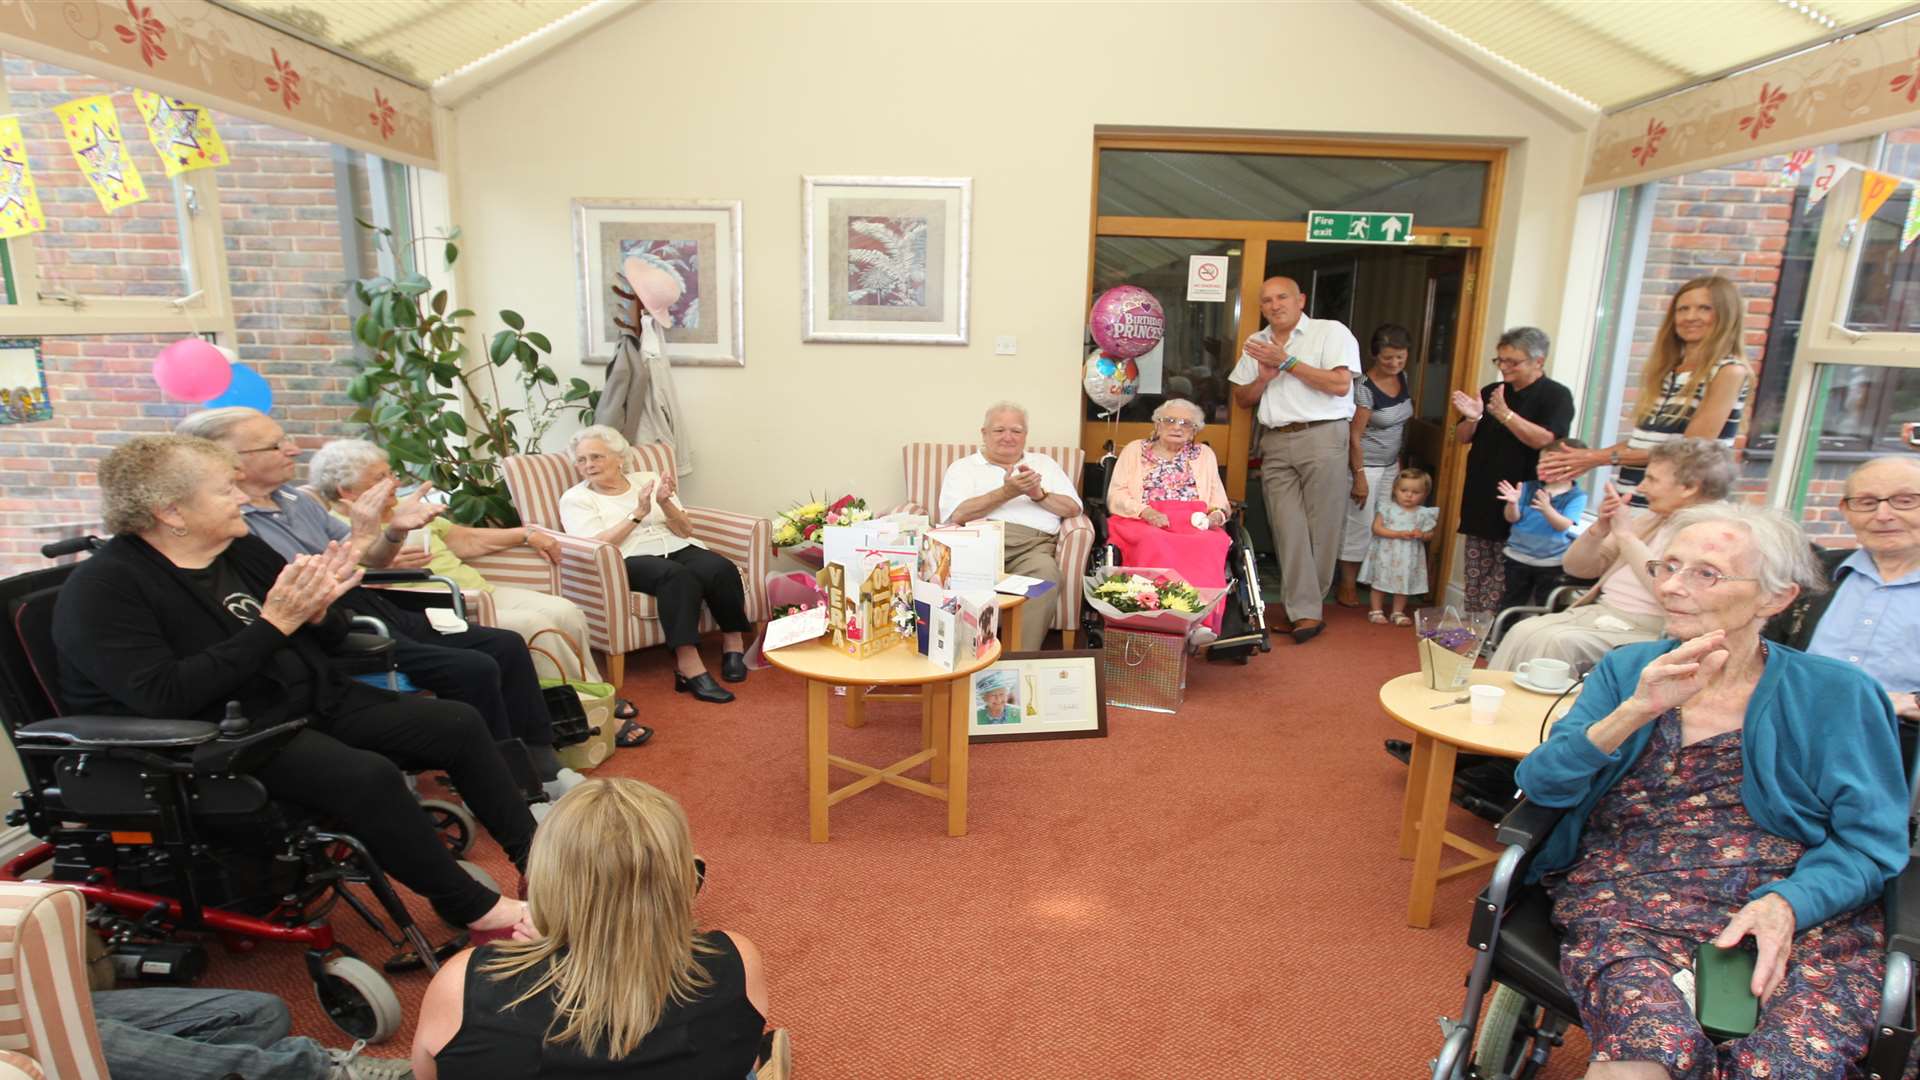 Vera Pigott, celebrates her 110th birthday with from left, Graham Pigott, son and Kevin Lee, grandson and other residents at Sutton Valence Care Home. Picture: John Westhrop.